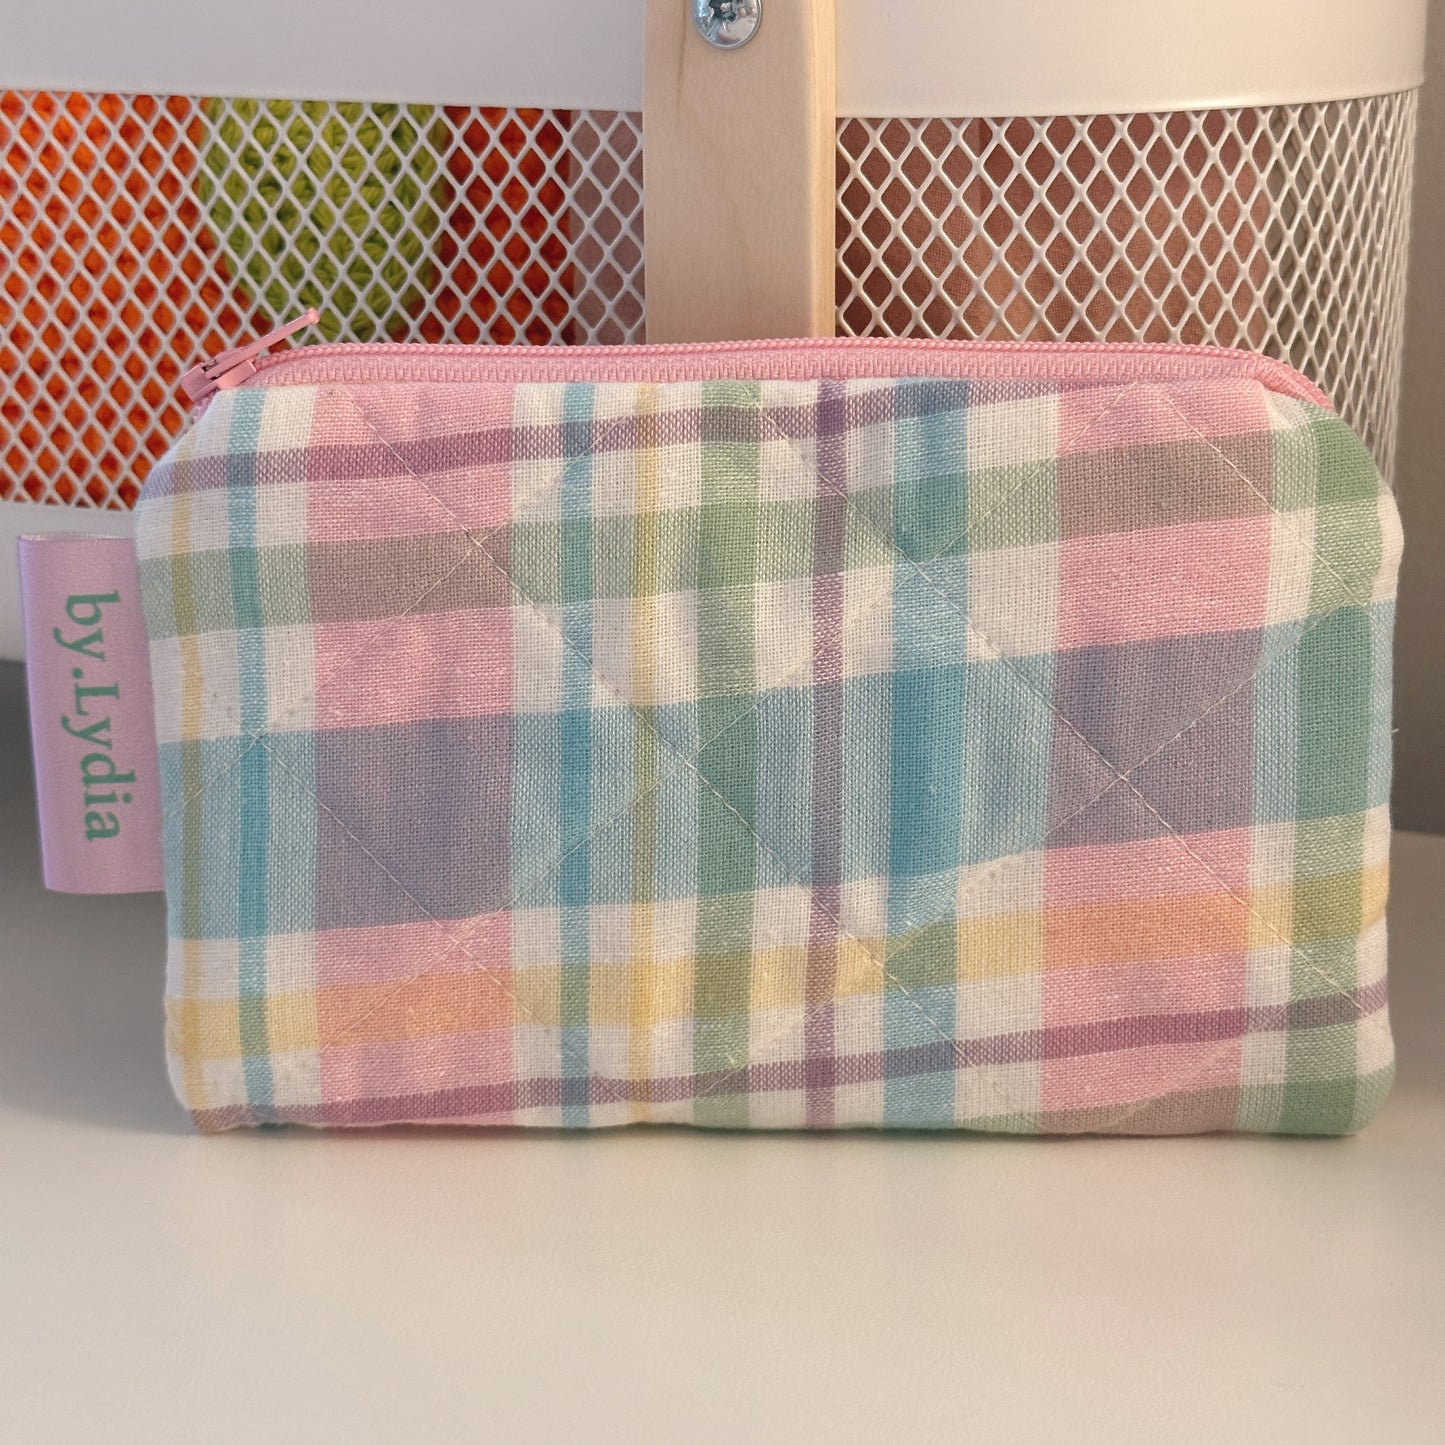 Small Flat Pouch - Spring Plaid